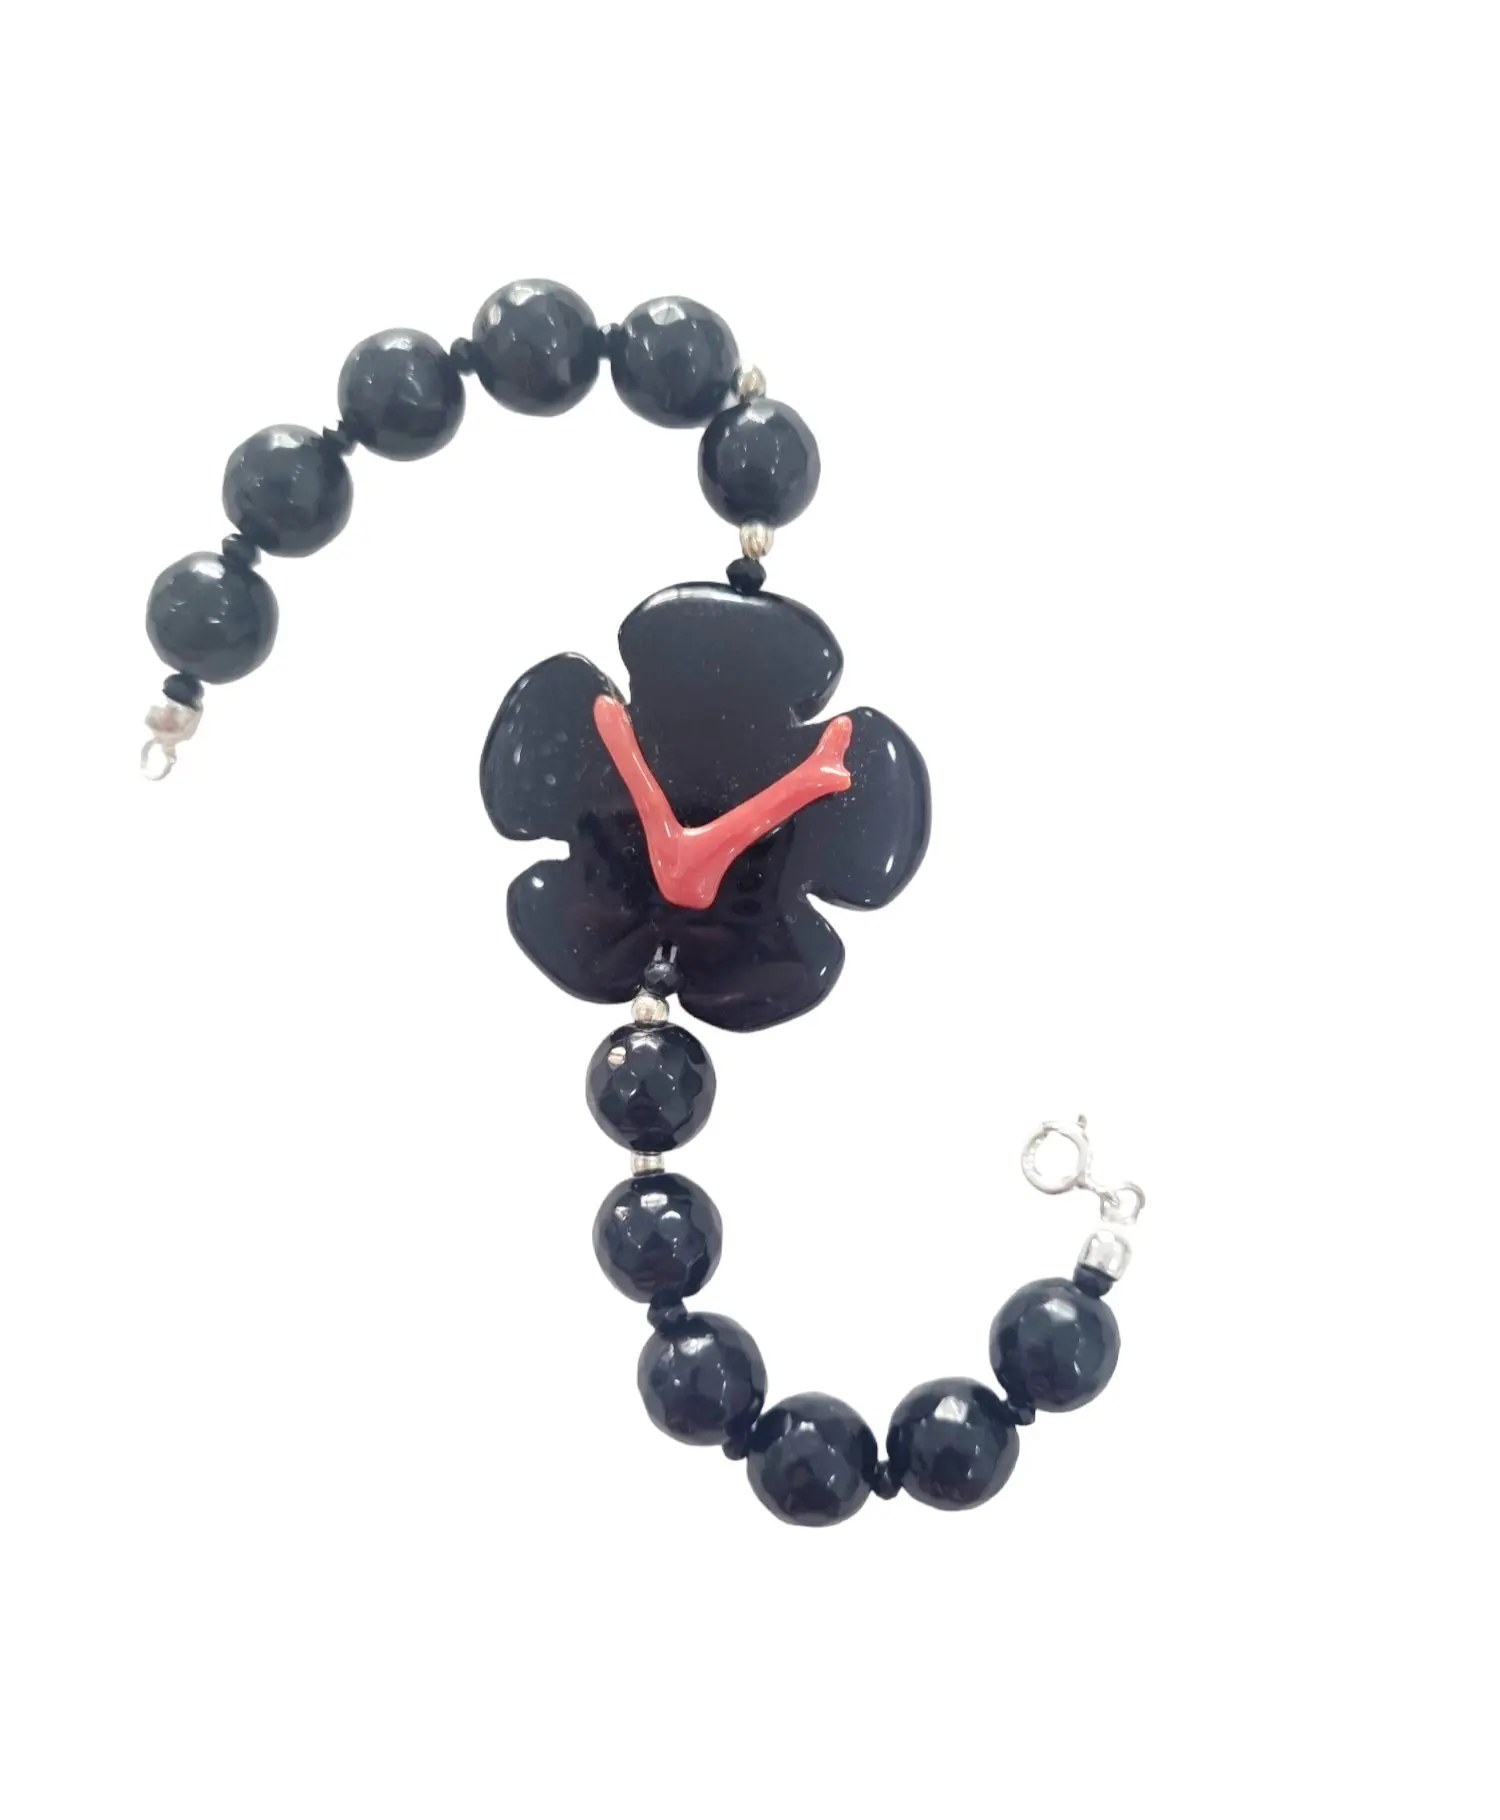 Bracelet made with onyx, crystals and coral. Length 20cm